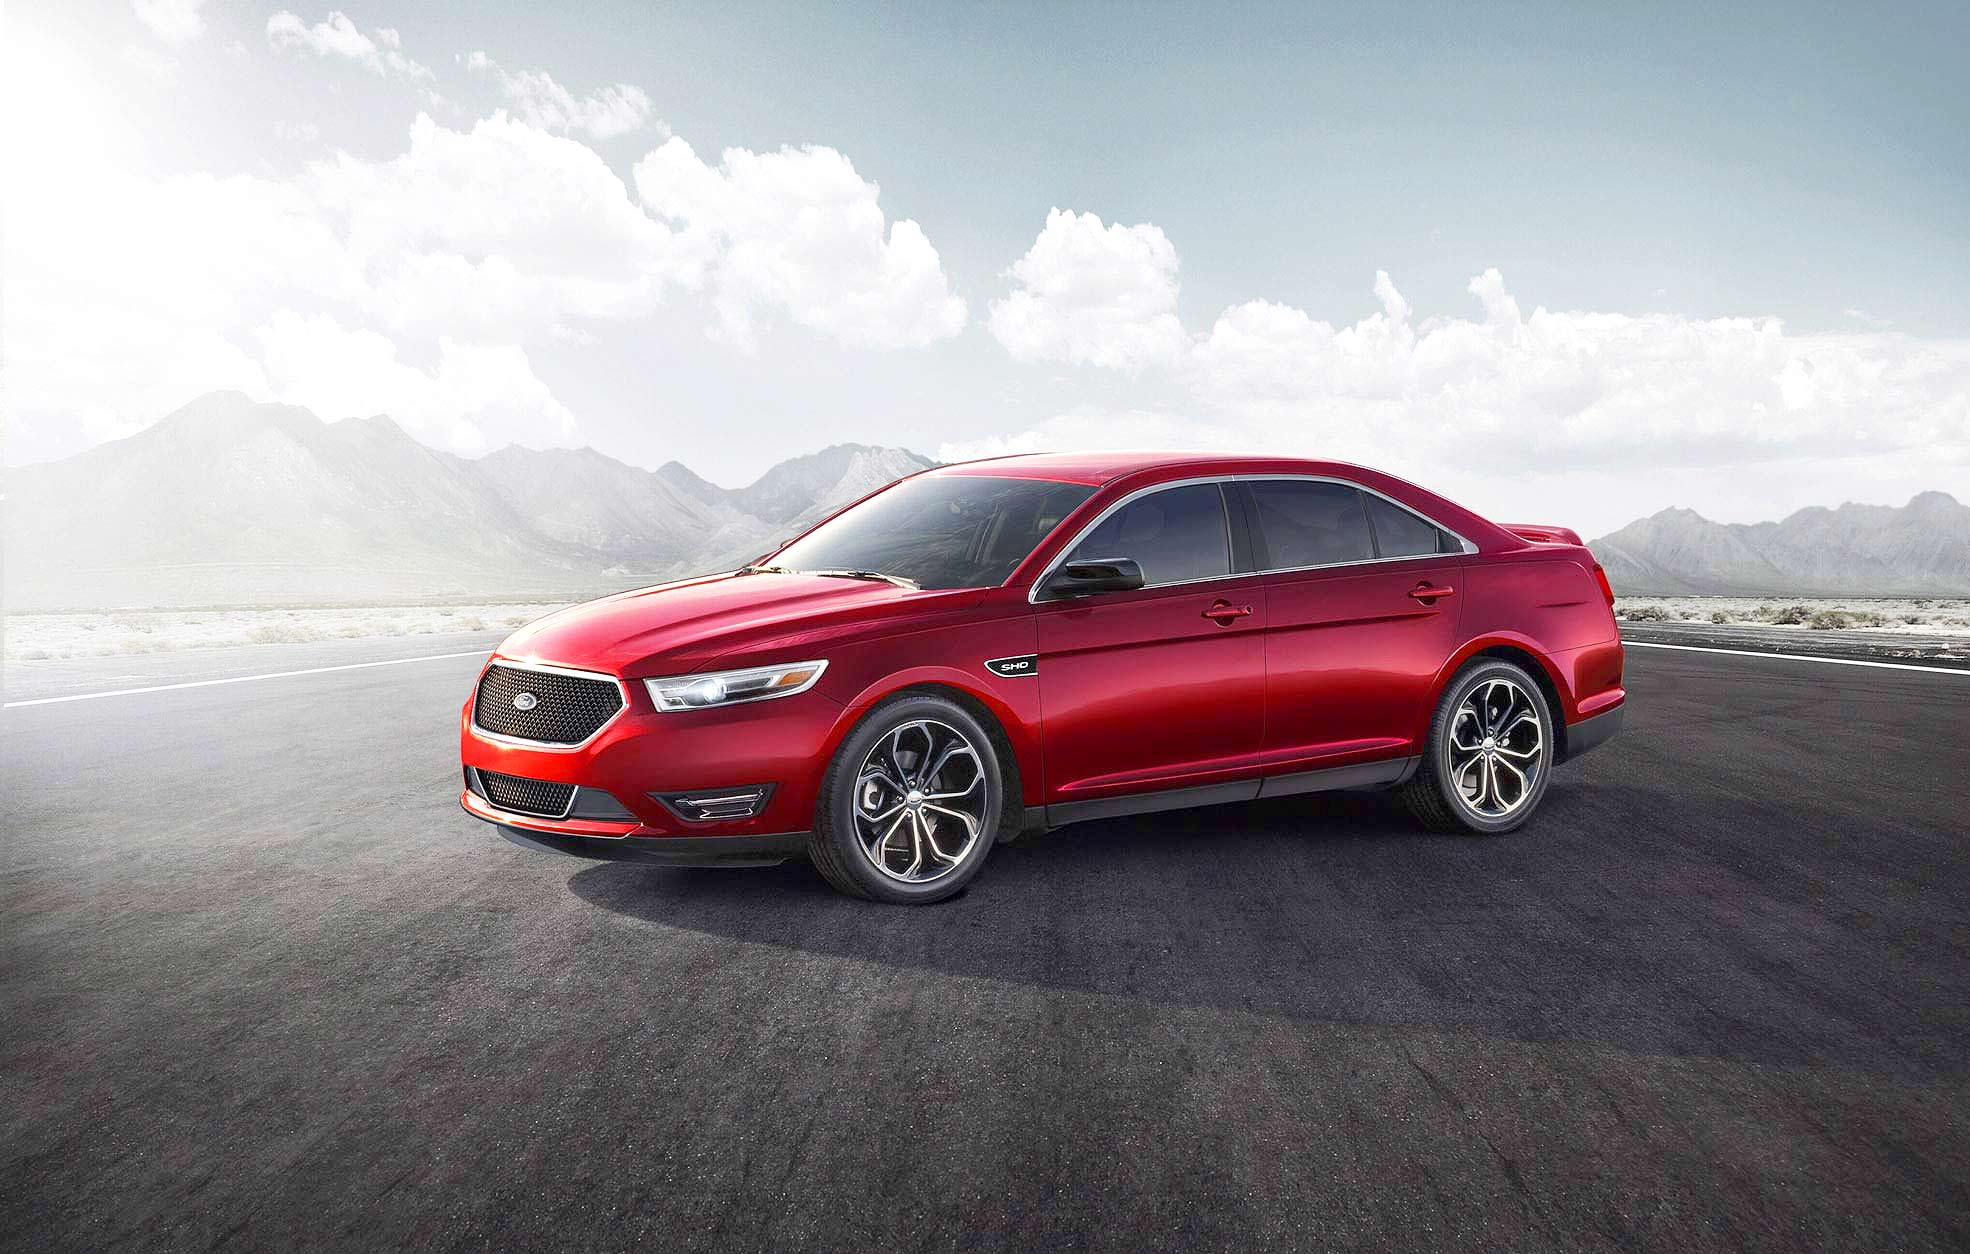 Is 2019 Ford Taurus the sports sedan you should buy? The